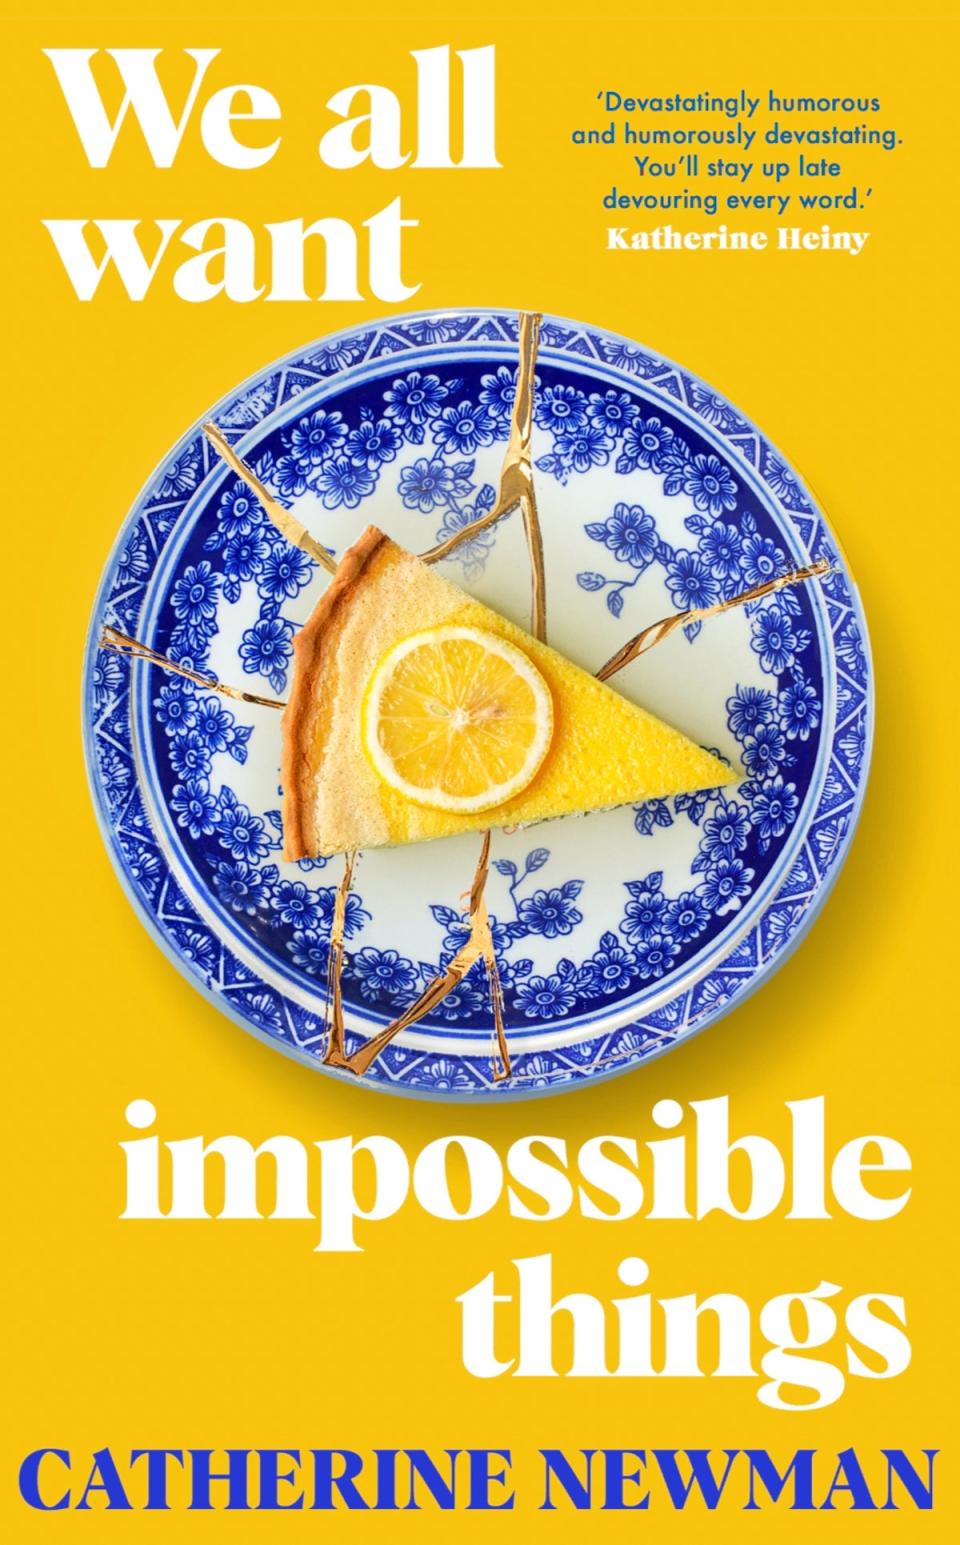 We All Want Impossible Things by Catherine Newman (Doubleday)